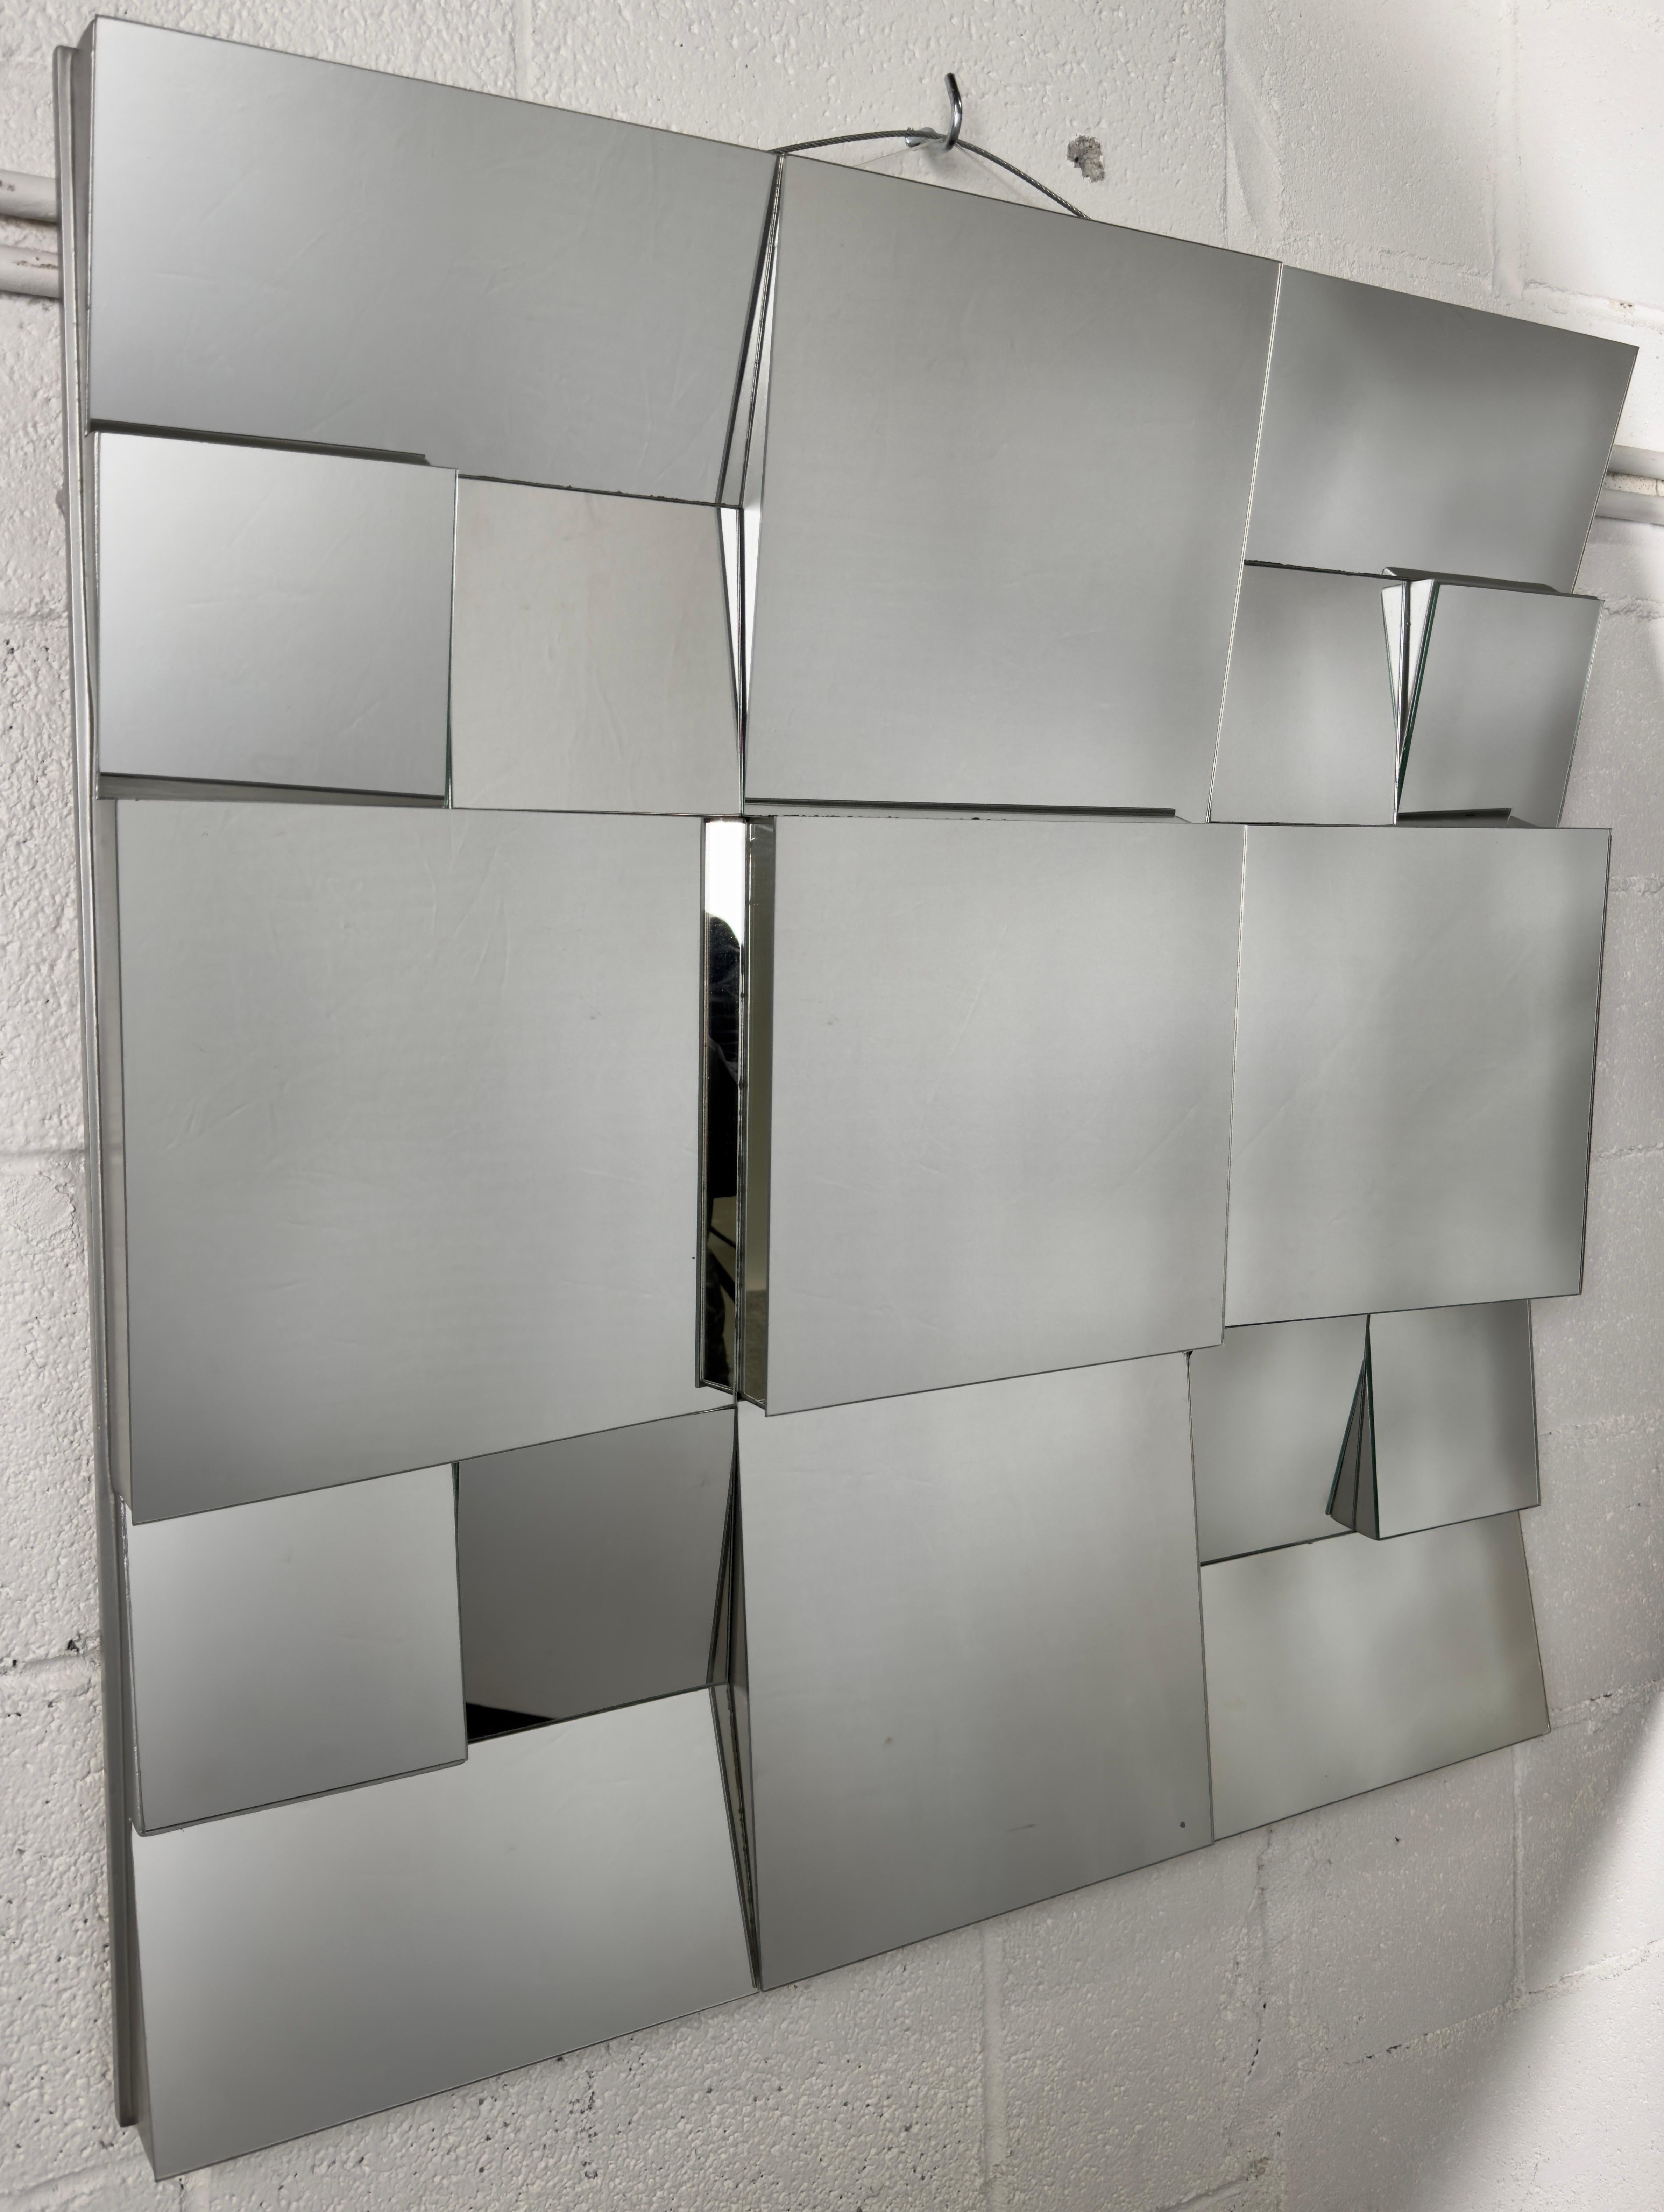 
An iconic Neal Small ( America, 1937)  cubist design sloped mirror, crafted in 1975 by the visionary American designer. Each facet of the mirror reflects Small's mastery, while the original enameled paint adorning the thick wood frame adds a touch